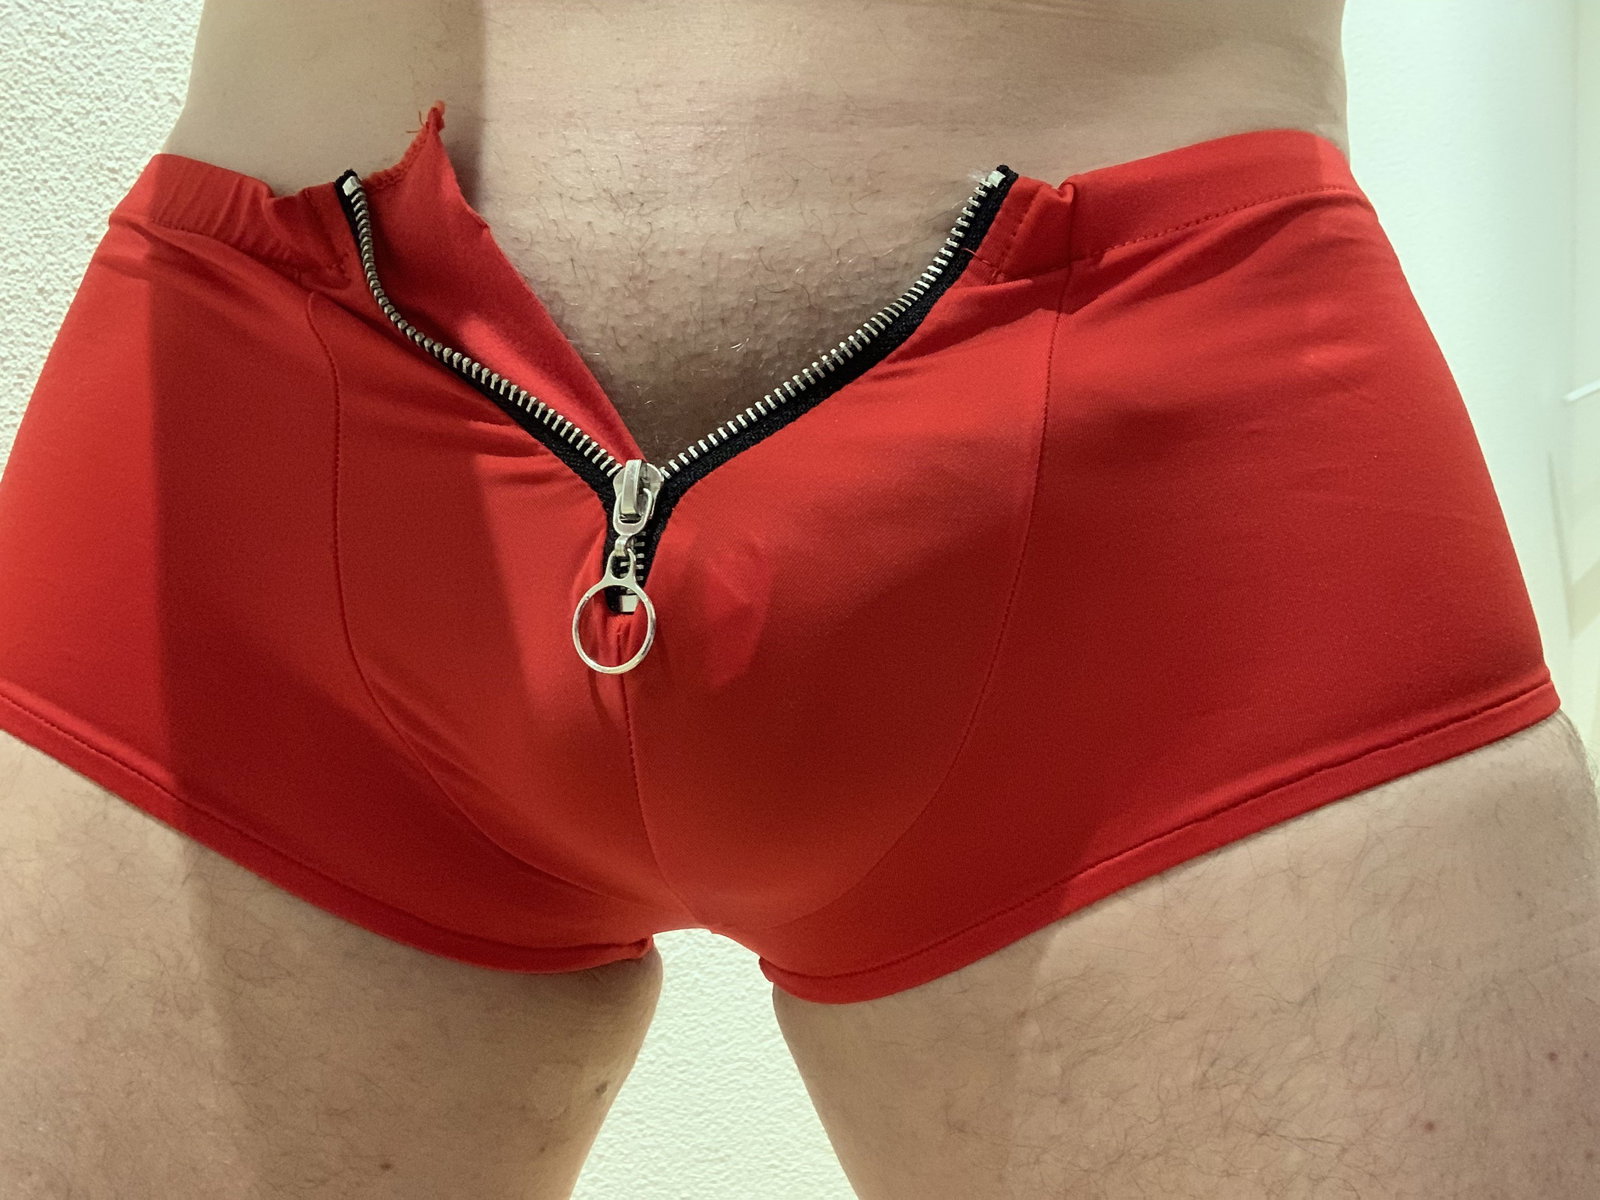 Watch the Photo by thoughtfulenjoyment with the username @thoughtfulenjoyment, who is a verified user, posted on February 3, 2022. The post is about the topic thoughtful. and the text says 'the very hot 🔥 @SexyMissG - check her page - said she wanted me to see in these red #malepower briefs with zipper. Of course you sexy. @CrazyLife might be inspired 🤩'